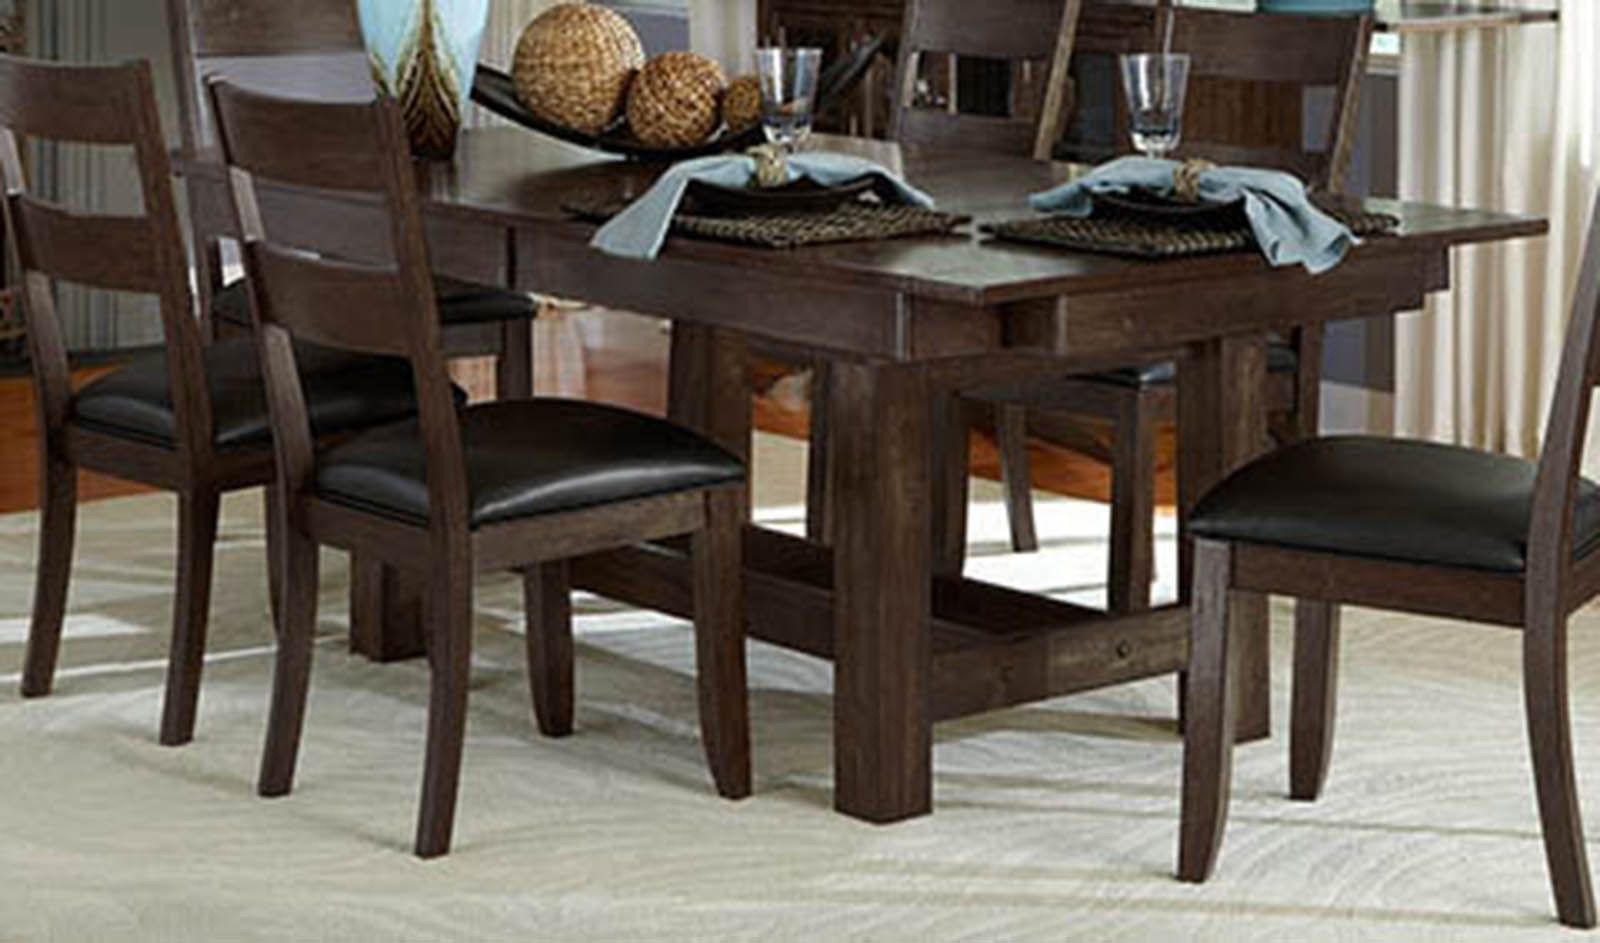 A America Furniture Mariposa Rectangular Trestle Table In Inside Widely Used Nerida Trestle Dining Tables (Gallery 13 of 20)